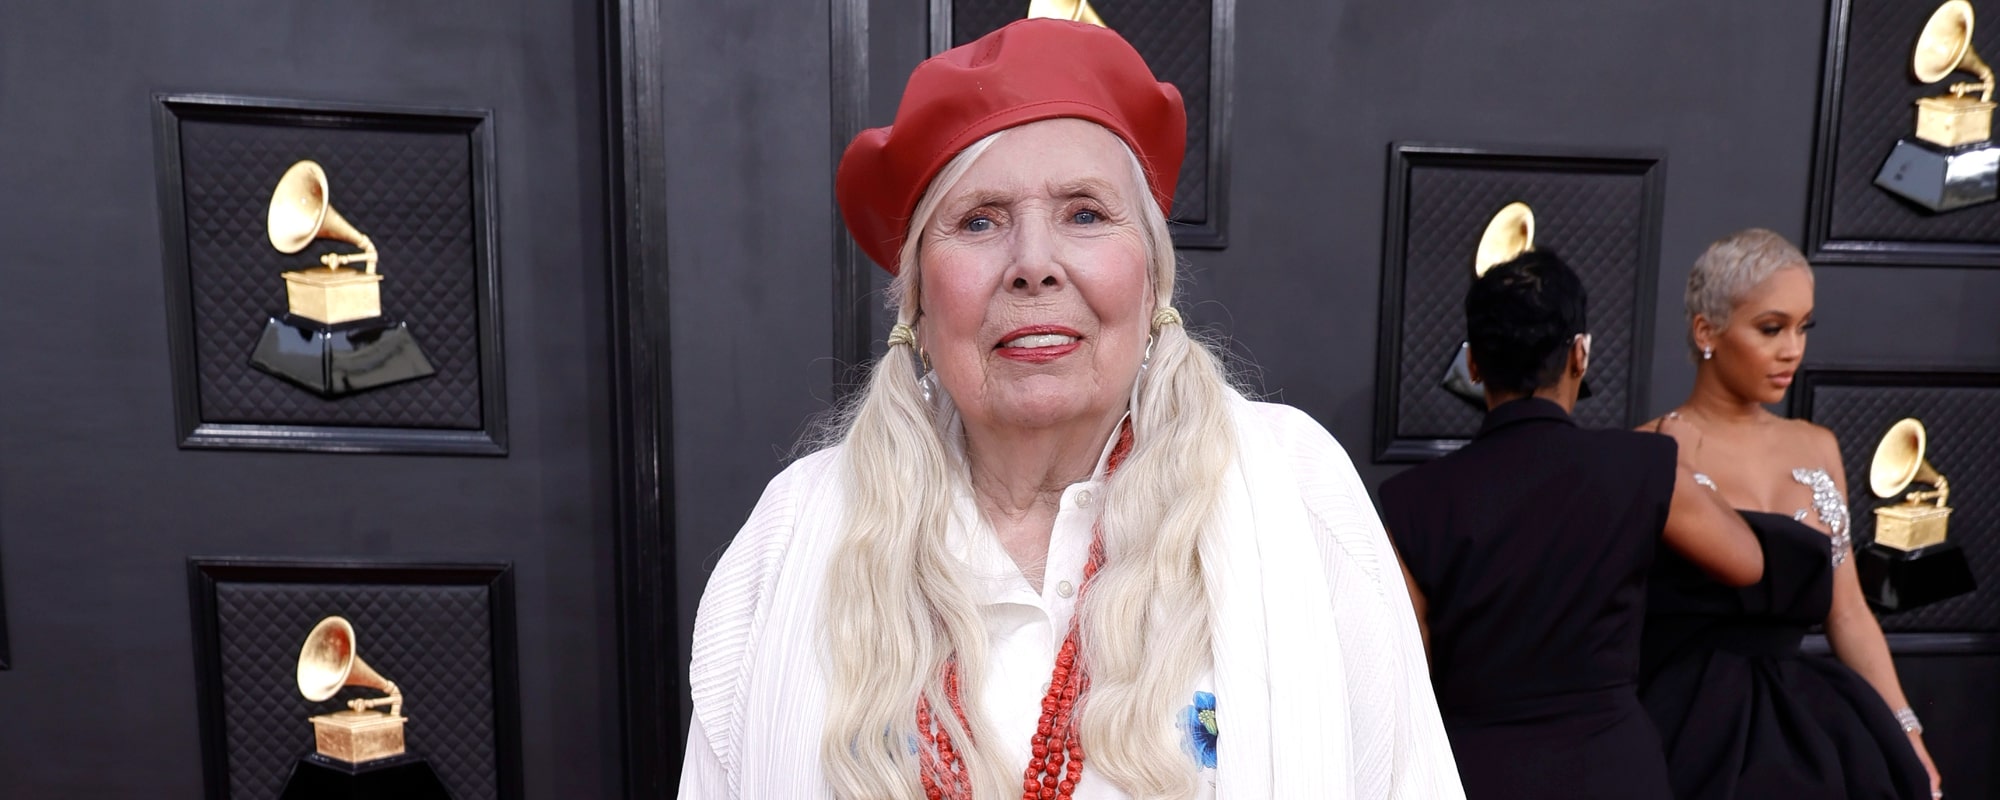 Watch Joni Mitchell Get Standing Ovation With Tear-Jerking GRAMMY Debut Performance of “Both Sides Now”